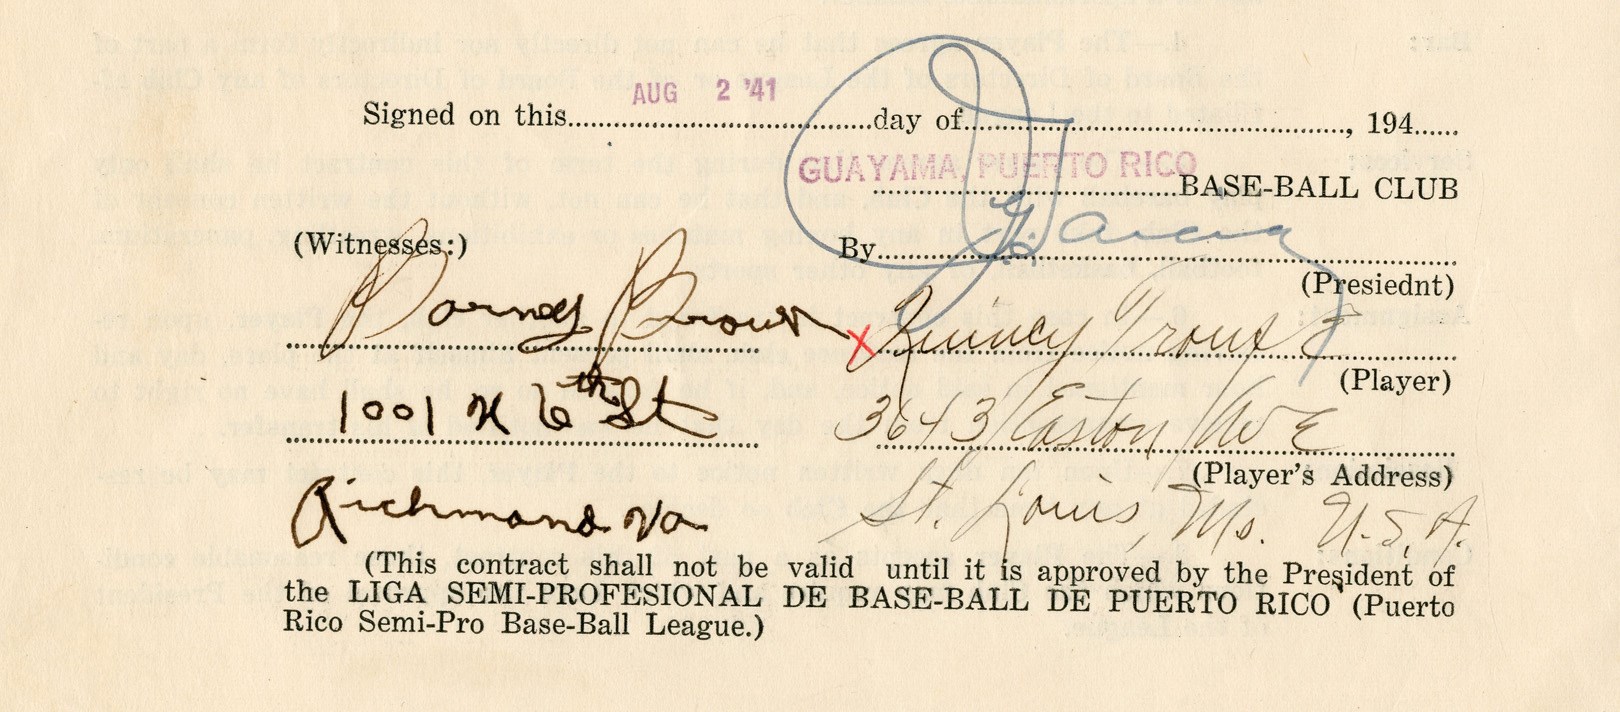 Negro League, Latin, Japanese & International Base - 1941-42 Quincy Trouppe Contract Witnessed by Negro Leaguer Barney Brown